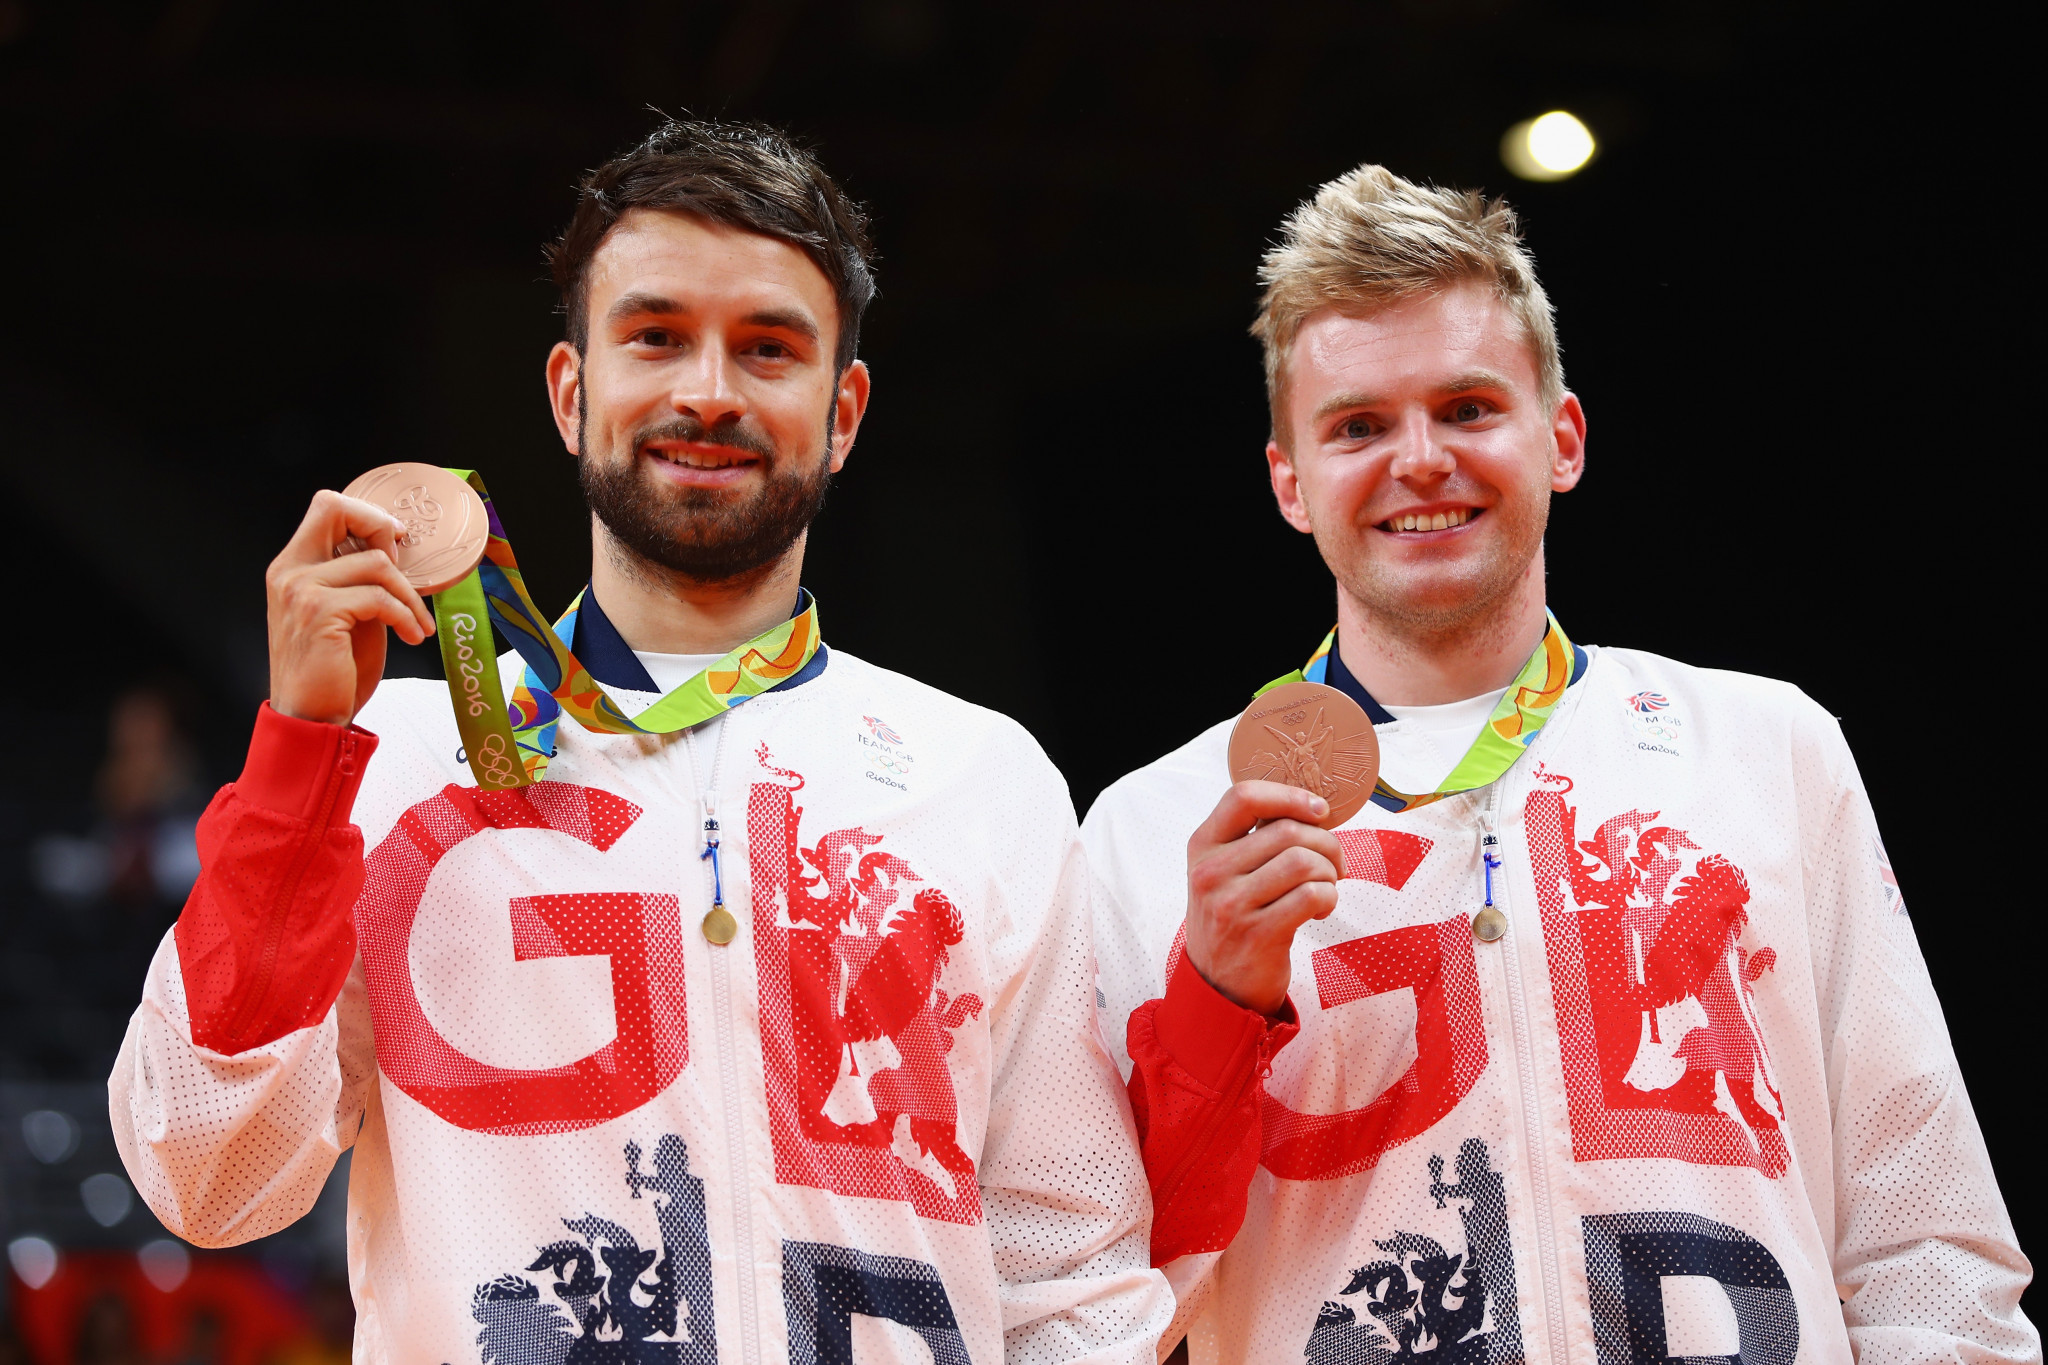 Chris Langridge and Marcus Ellis claimed bronze in the men's doubles at Rio 2016 ©Getty Images